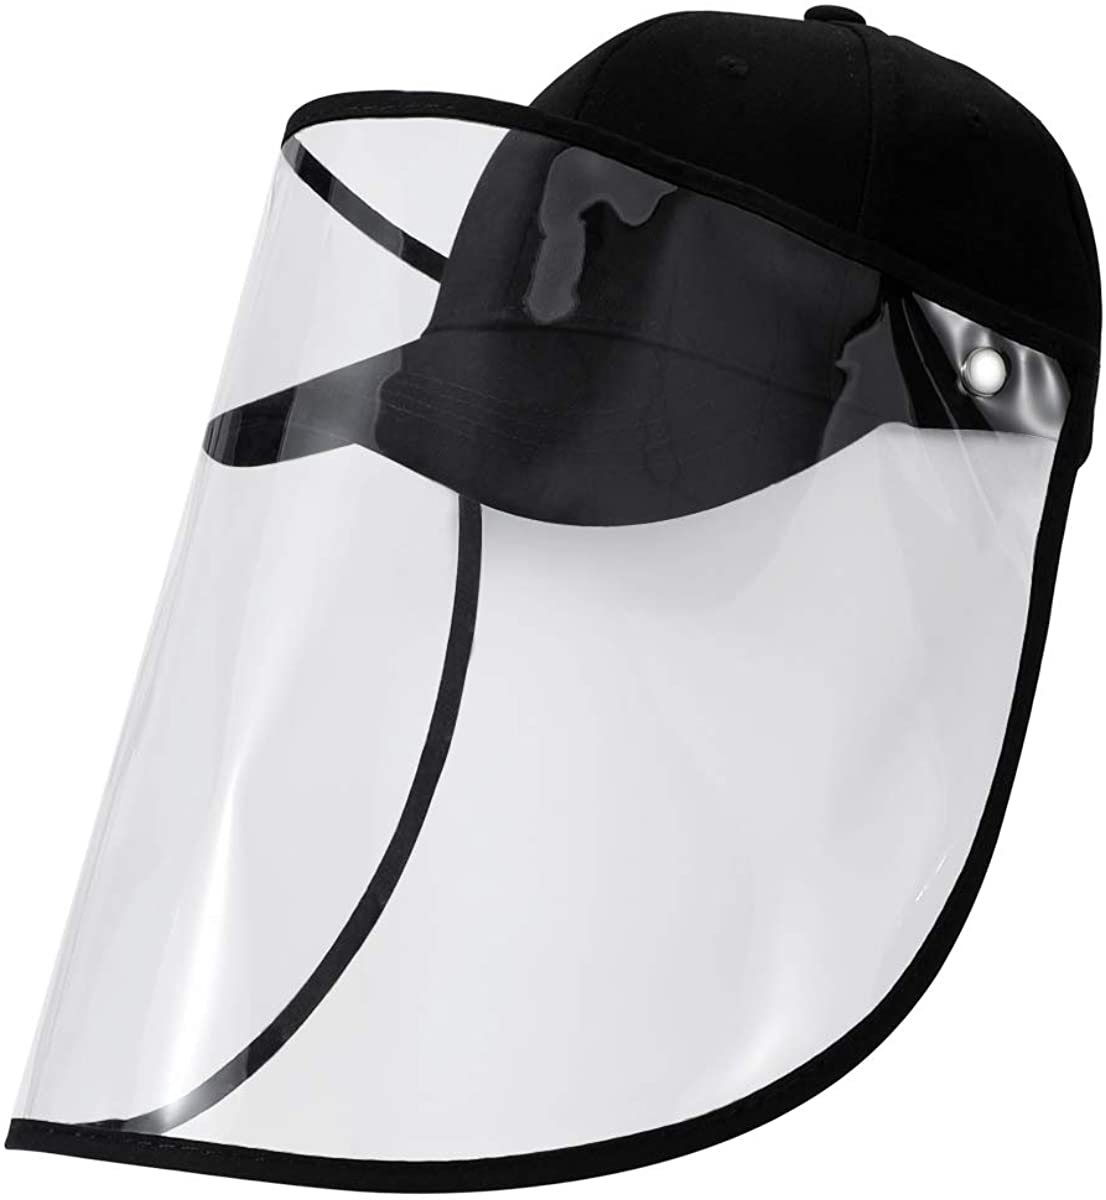 KIDS Baseball Cap with Removable Face Shield